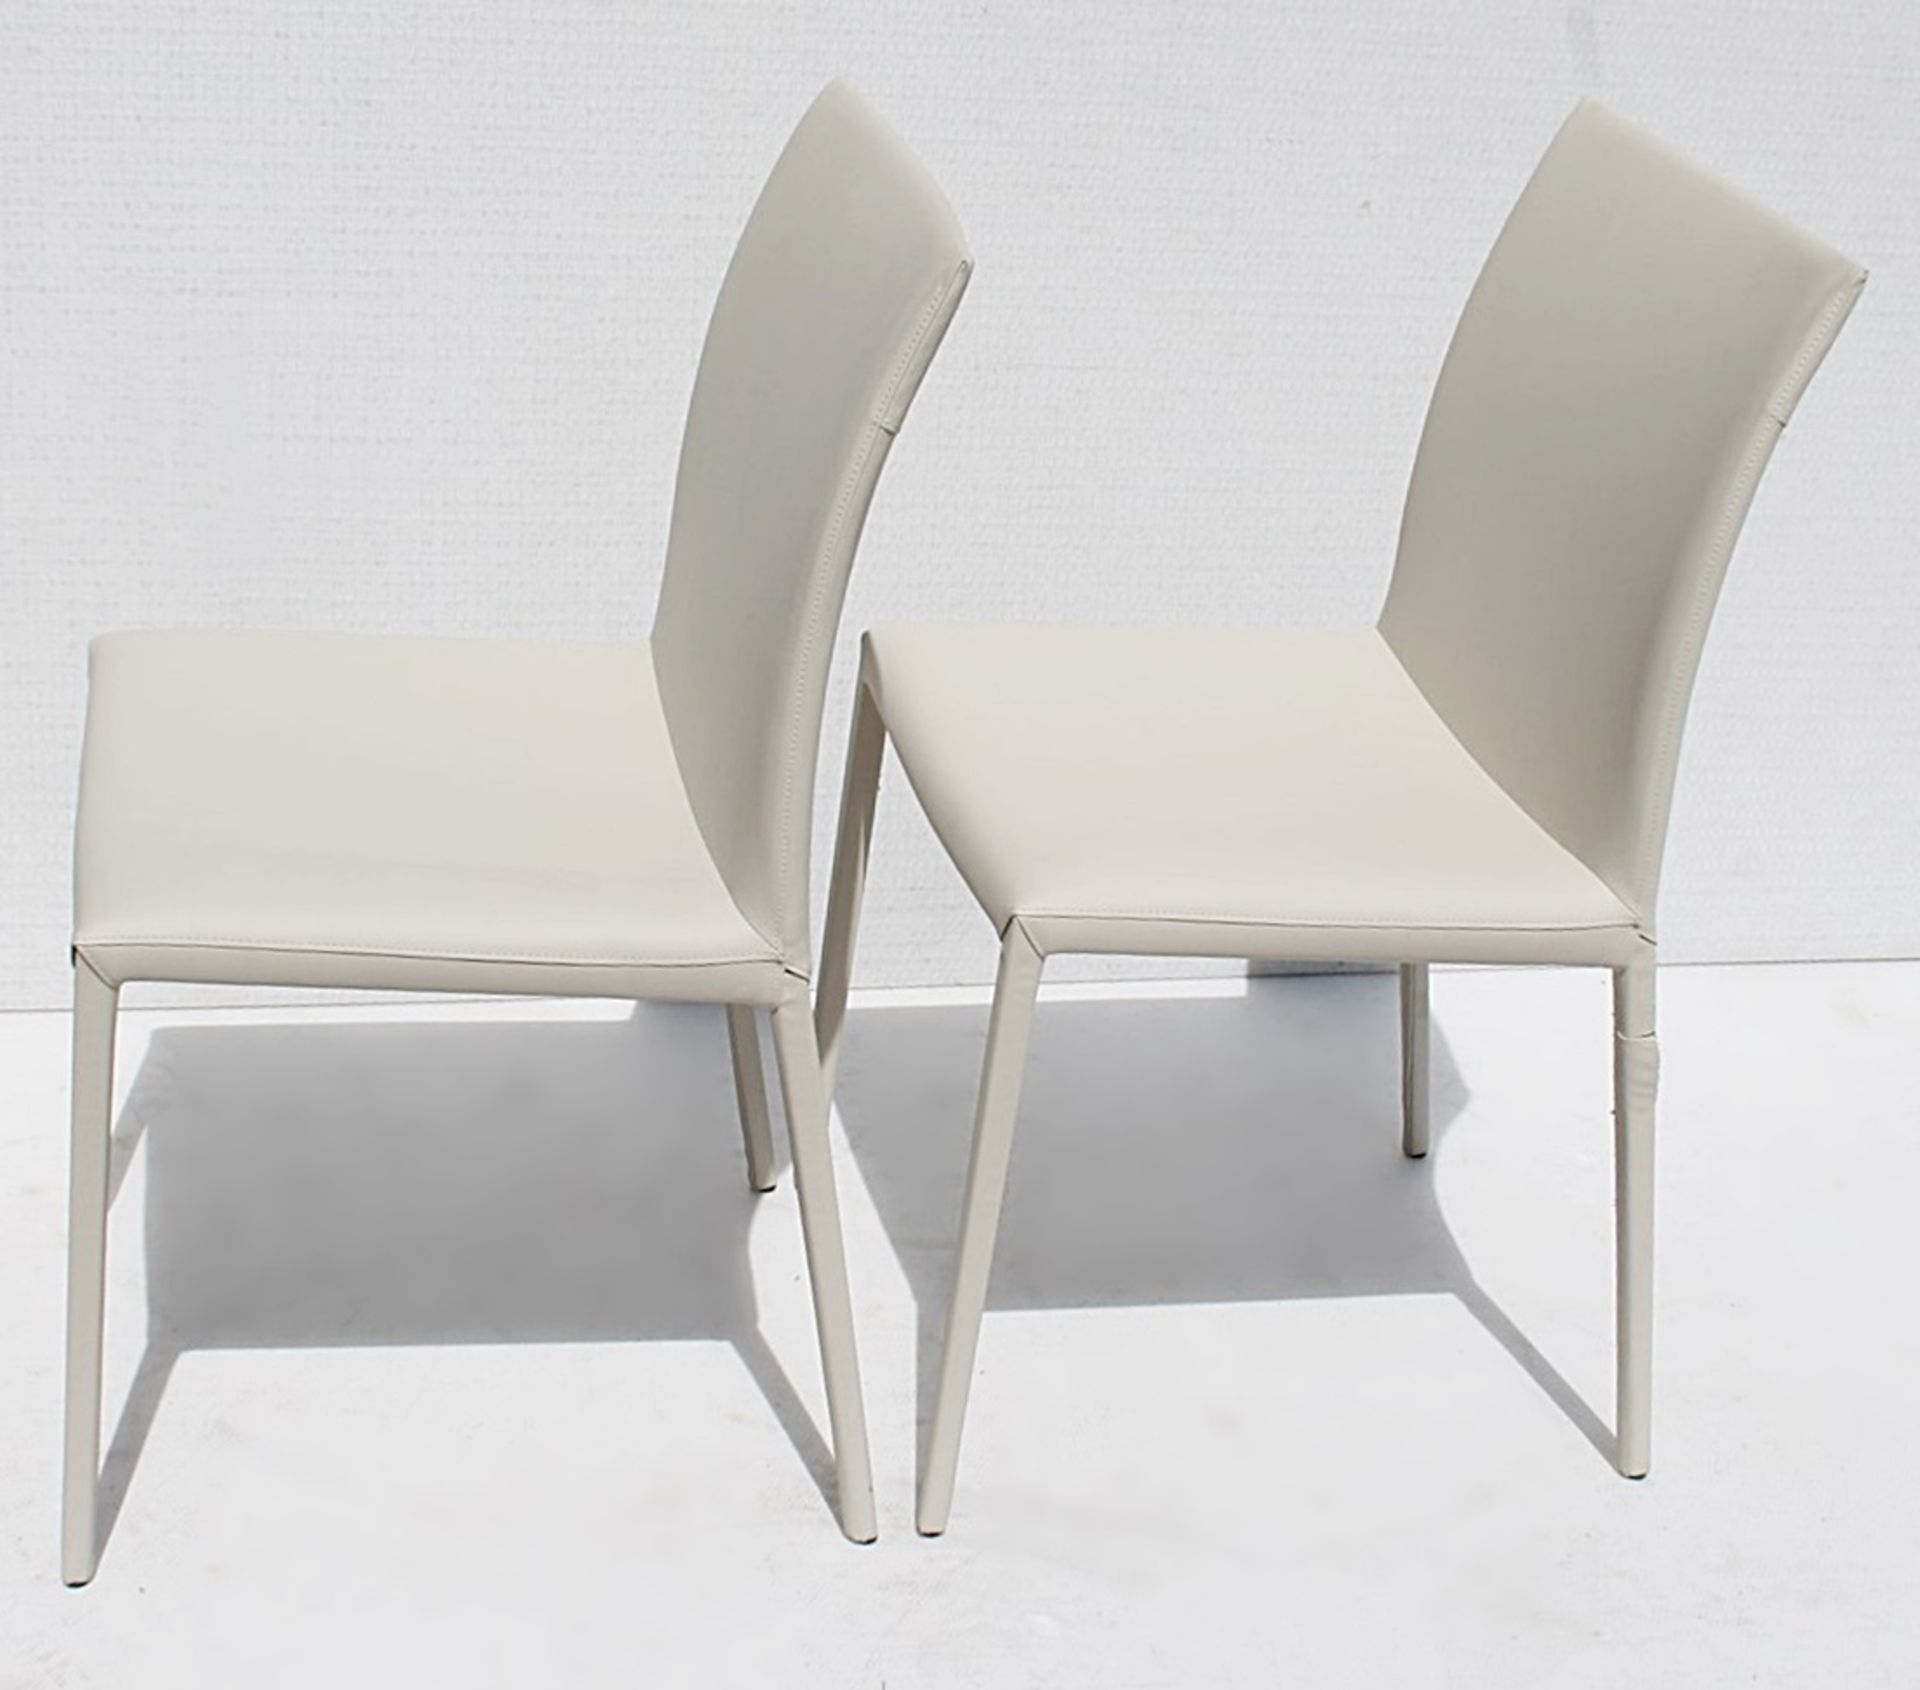 Pair Of CATELLAN 'Norma' Designer Italian Leather Barstools With Curved Backs In A Pale Taupe - - Image 3 of 6